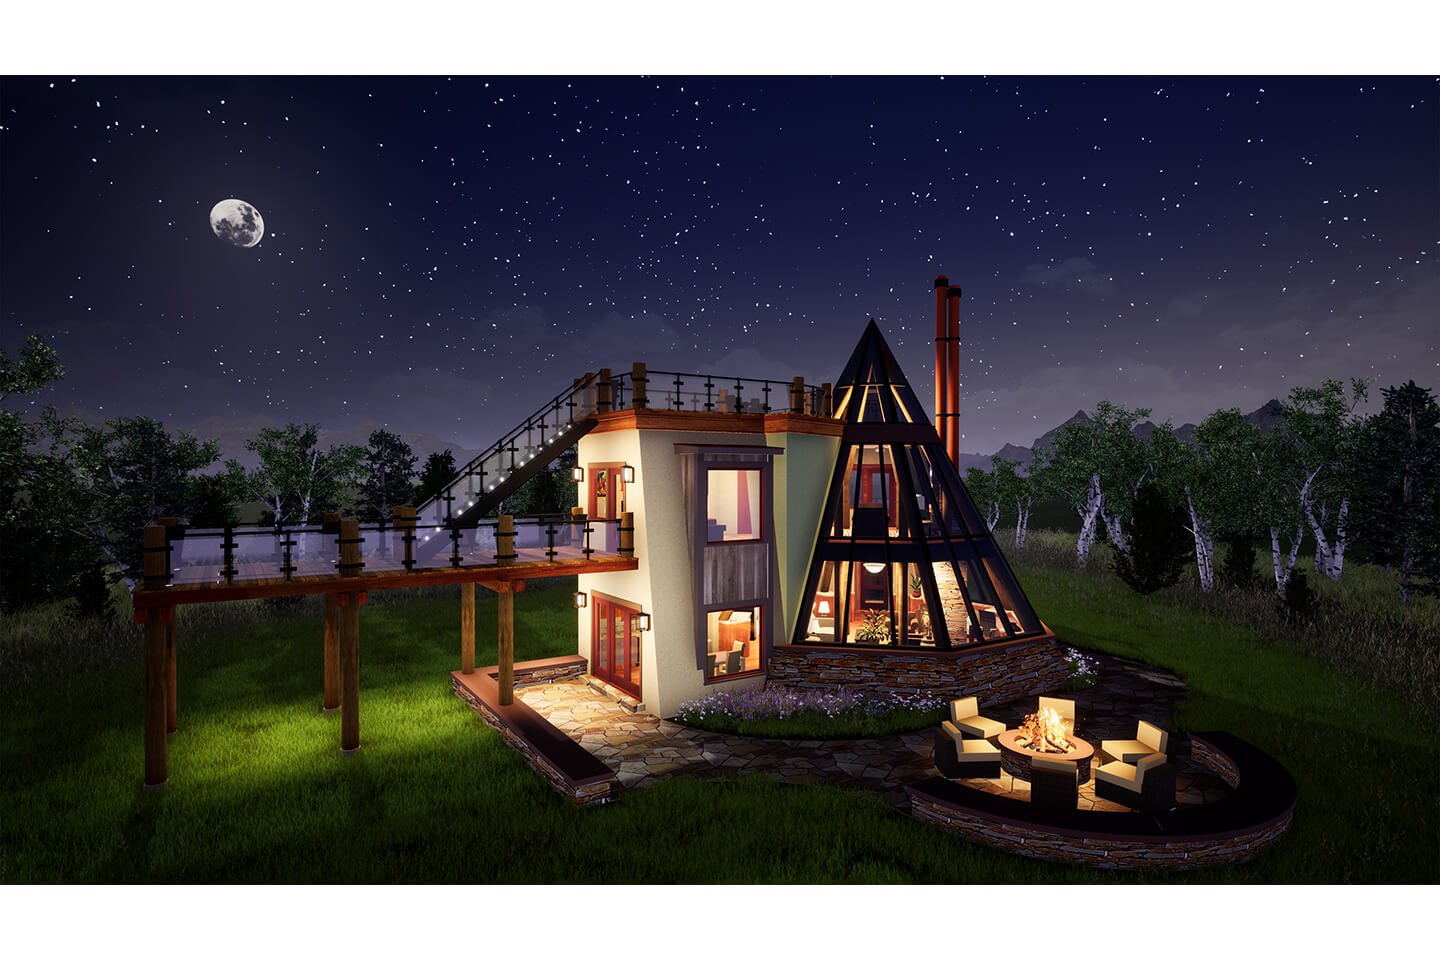 3D rendering of moonlit teepee and outdoor fireplace